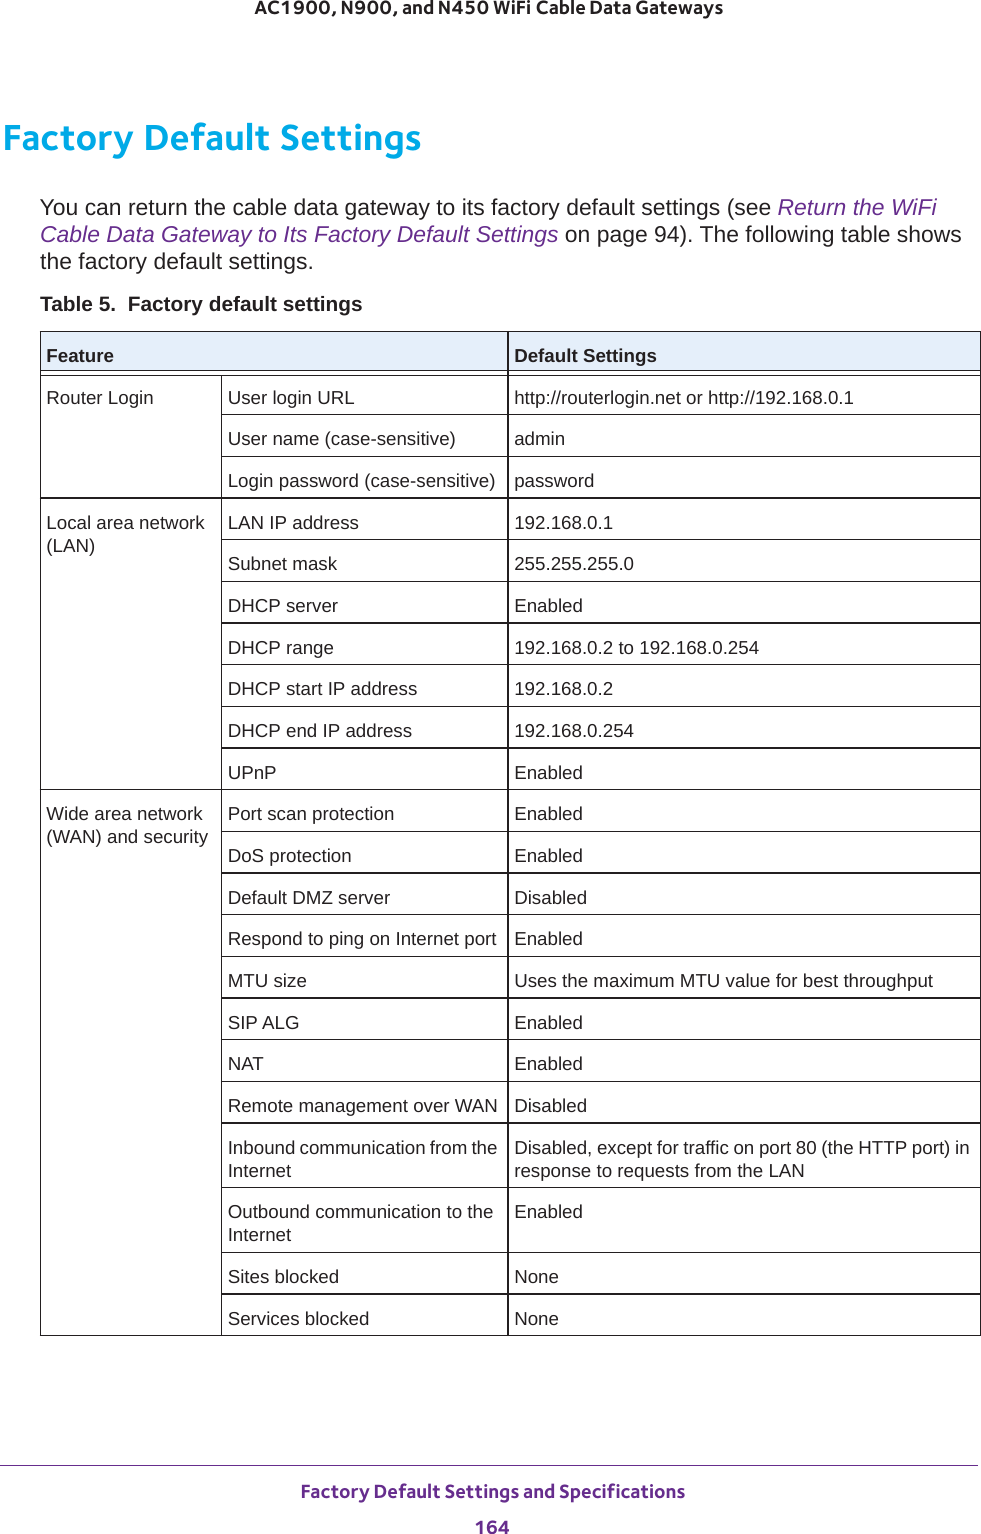  Factory Default Settings and Specifications164AC1900, N900, and N450 WiFi Cable Data Gateways Factory Default SettingsYou can return the cable data gateway to its factory default settings (see Return the WiFi Cable Data Gateway to Its Factory Default Settings on page  94). The following table shows the factory default settings.Table 5.  Factory default settings Feature Default SettingsRouter Login User login URL http://routerlogin.net or http://192.168.0.1User name (case-sensitive) admin Login password (case-sensitive) passwordLocal area network (LAN)LAN IP address 192.168.0.1Subnet mask 255.255.255.0DHCP server EnabledDHCP range 192.168.0.2 to 192.168.0.254DHCP start IP address 192.168.0.2DHCP end IP address 192.168.0.254UPnP EnabledWide area network (WAN) and securityPort scan protection EnabledDoS protection EnabledDefault DMZ server DisabledRespond to ping on Internet port EnabledMTU size  Uses the maximum MTU value for best throughputSIP ALG EnabledNAT EnabledRemote management over WAN DisabledInbound communication from the InternetDisabled, except for traffic on port 80 (the HTTP port) in response to requests from the LANOutbound communication to the InternetEnabledSites blocked NoneServices blocked None